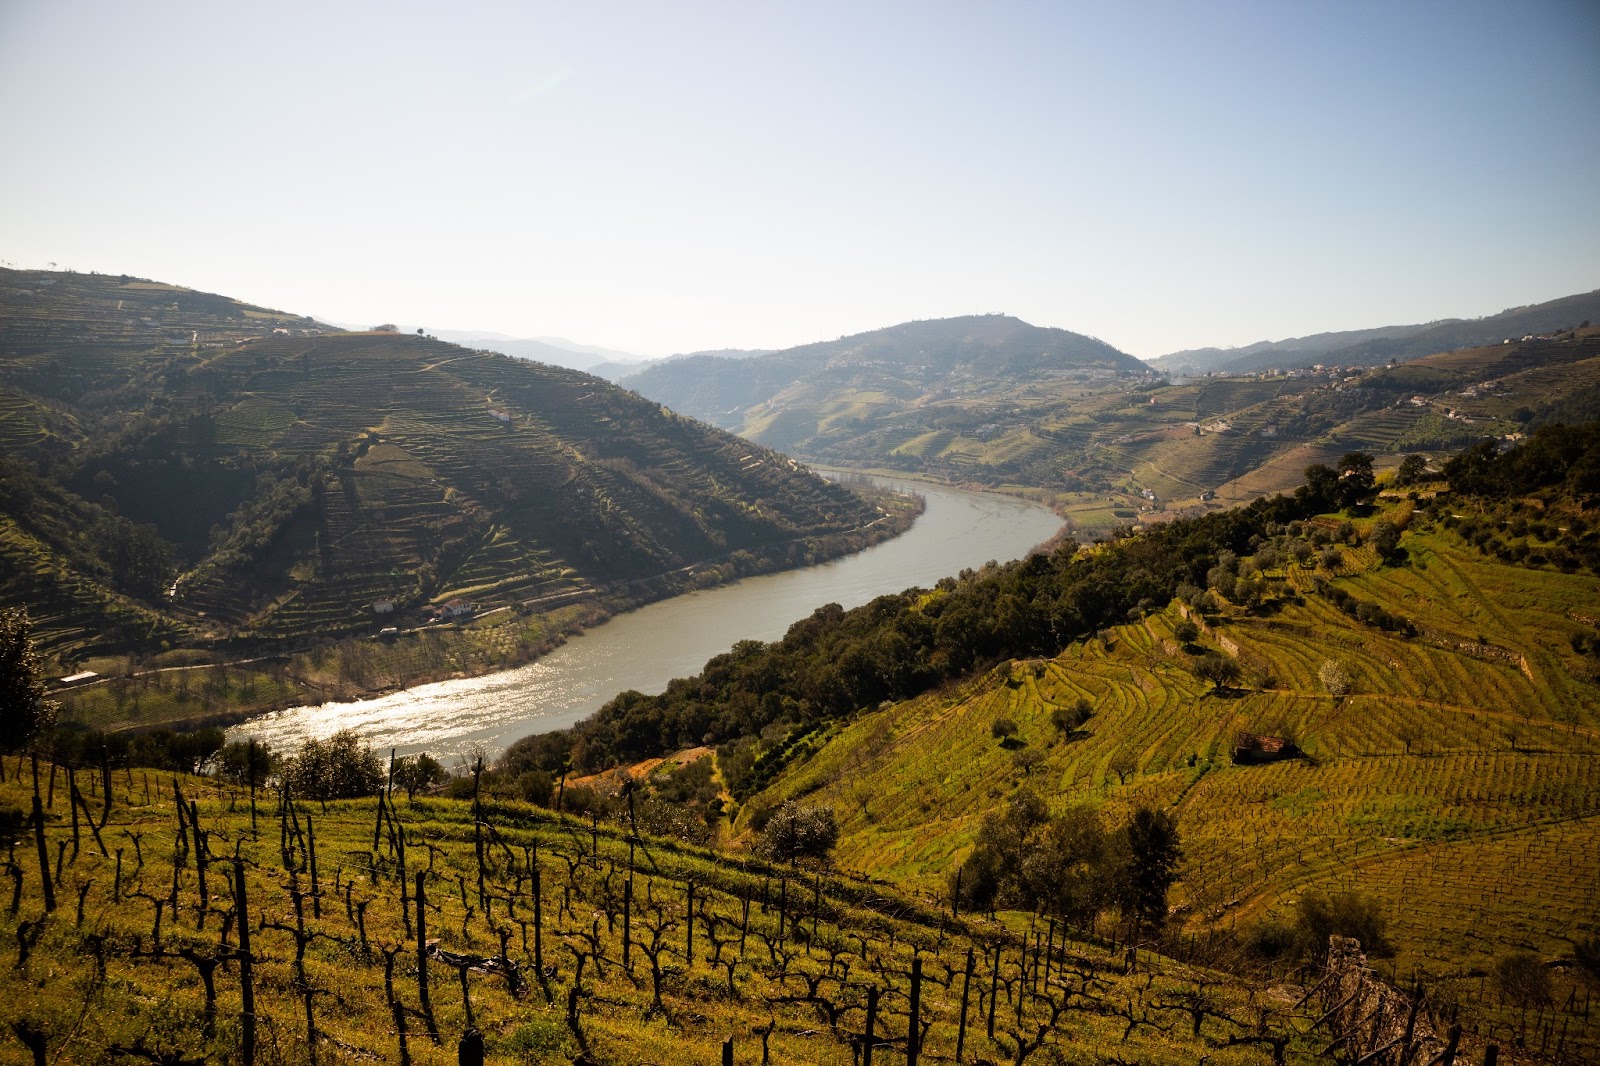 The Douro River surrounded by vibrant green vineyards and terraced landscapes.
